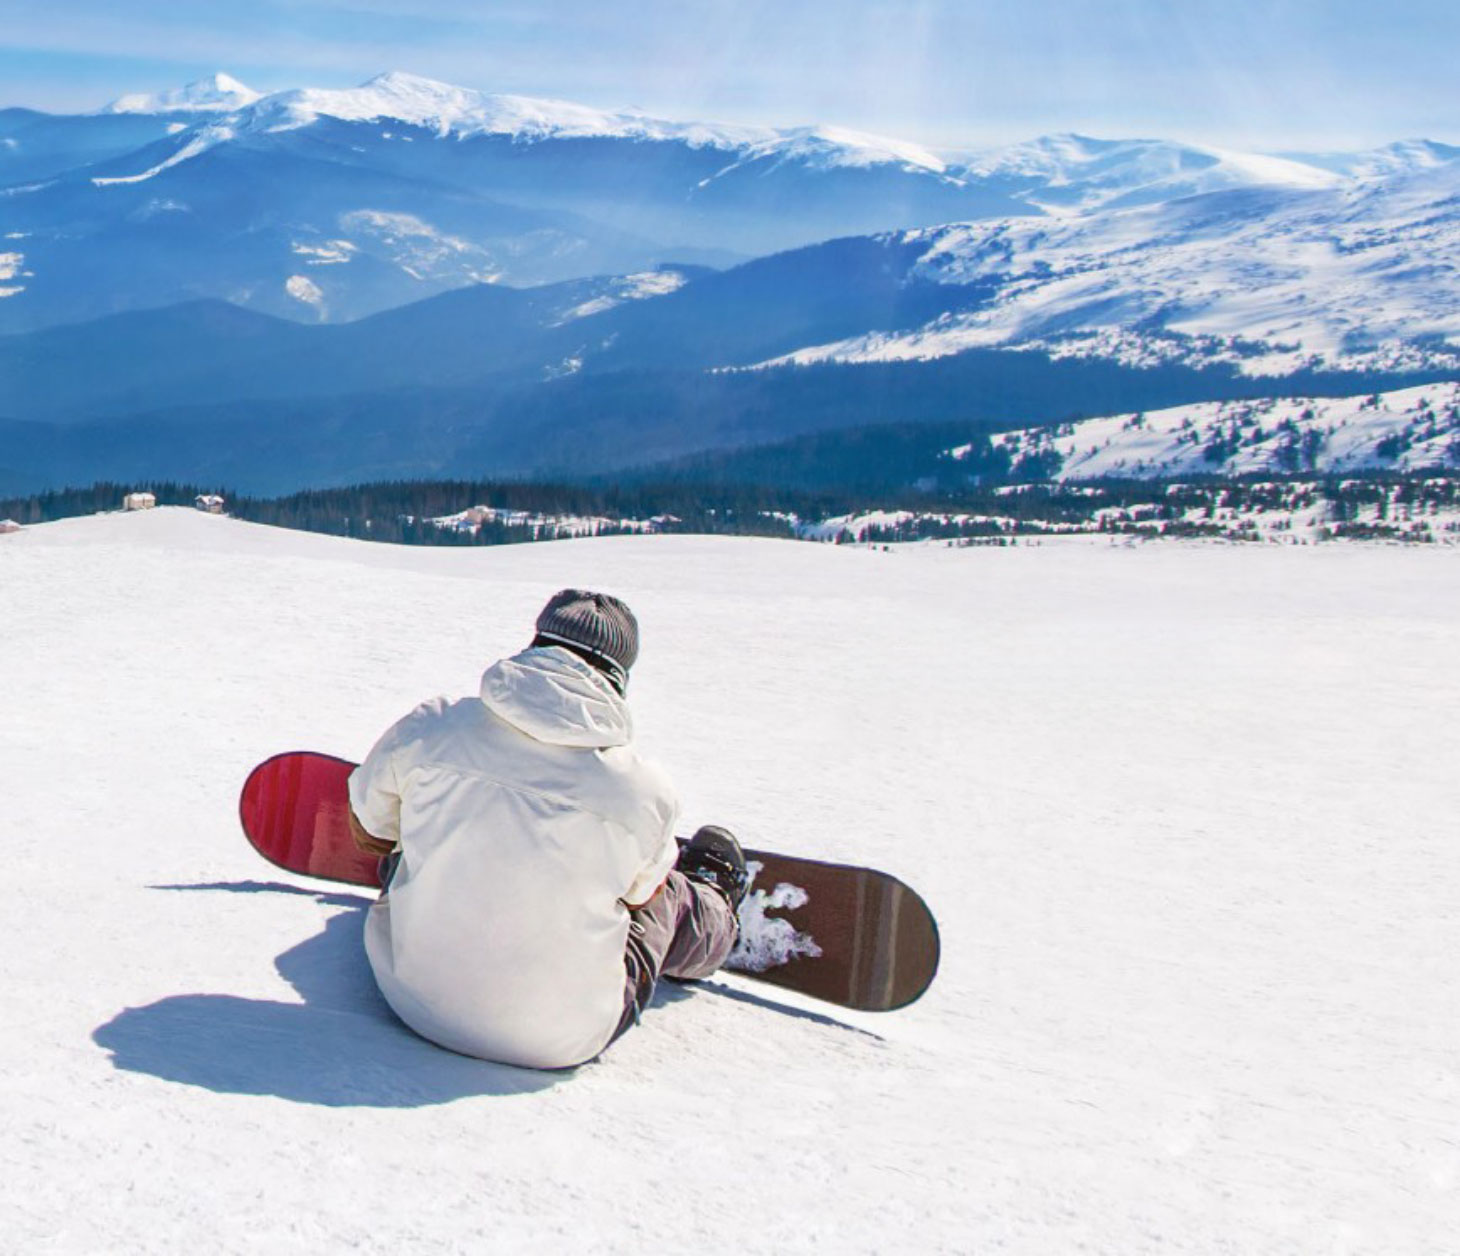 Snowboarder sitting at top of mountain, looking over horizon